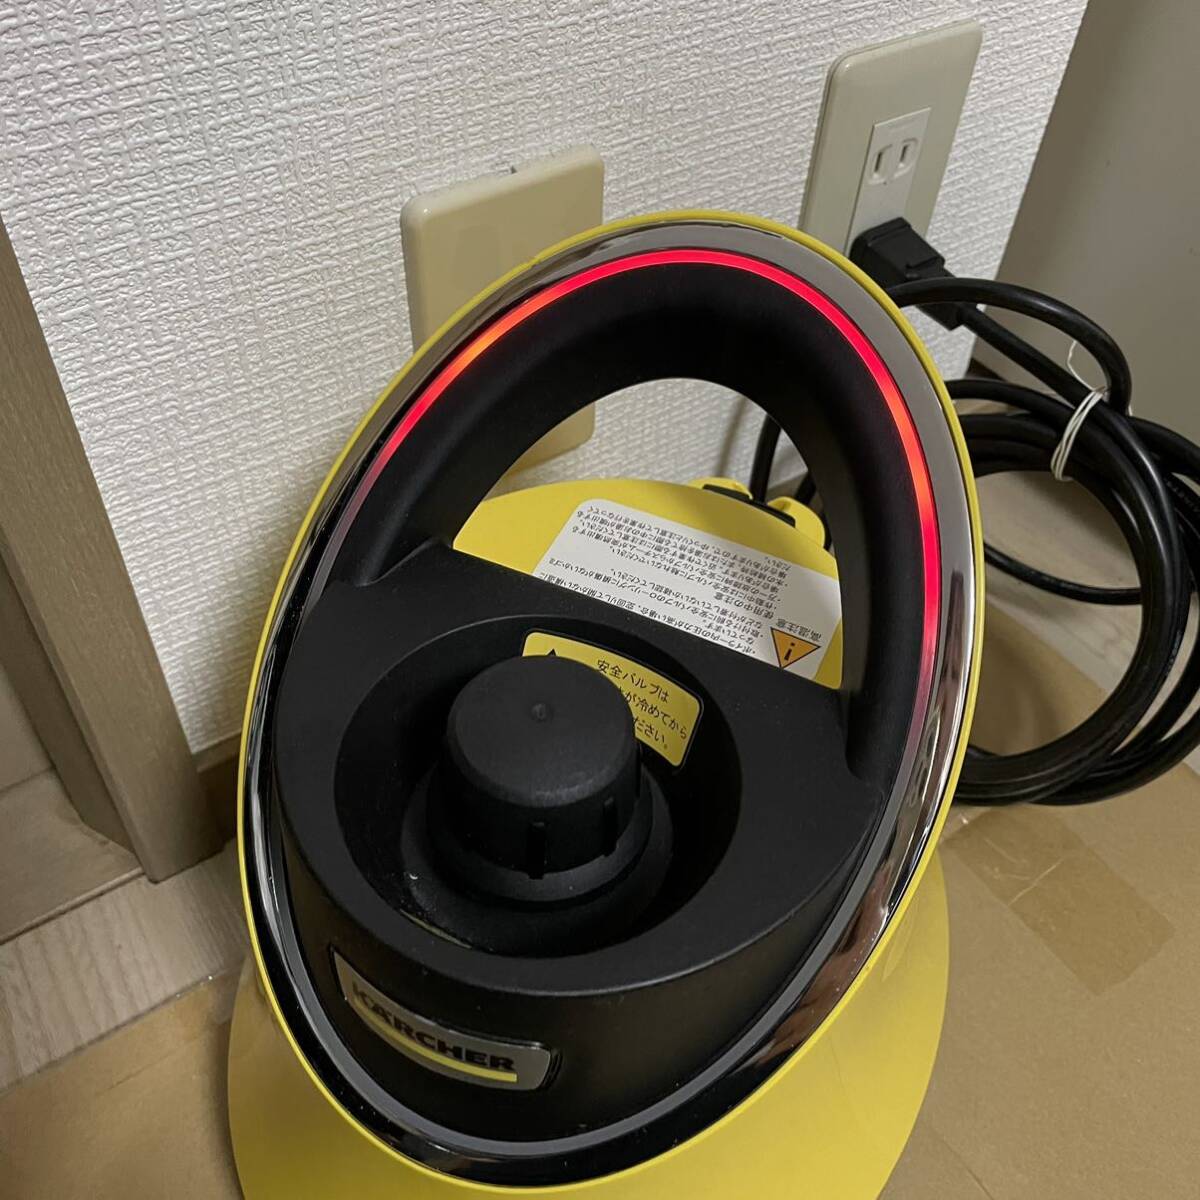  Karcher KARCHER steam cleaner SCJTK20japa net model cleaning consumer electronics high temperature steam instructions attaching box attaching electrification has confirmed 